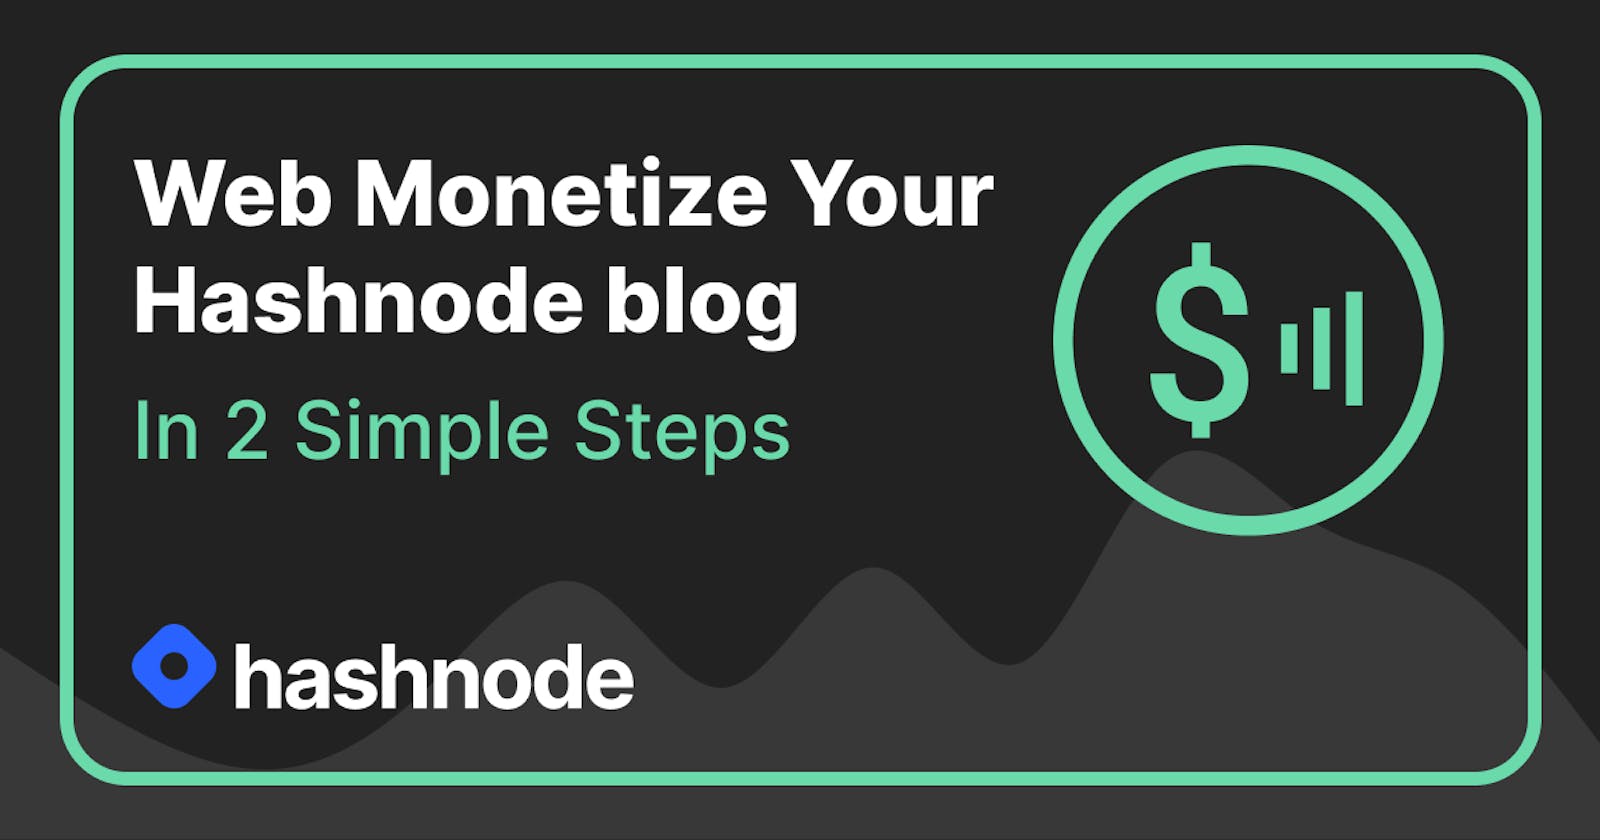 How to enable Web Monetization on your Hashnode blog in 2 steps